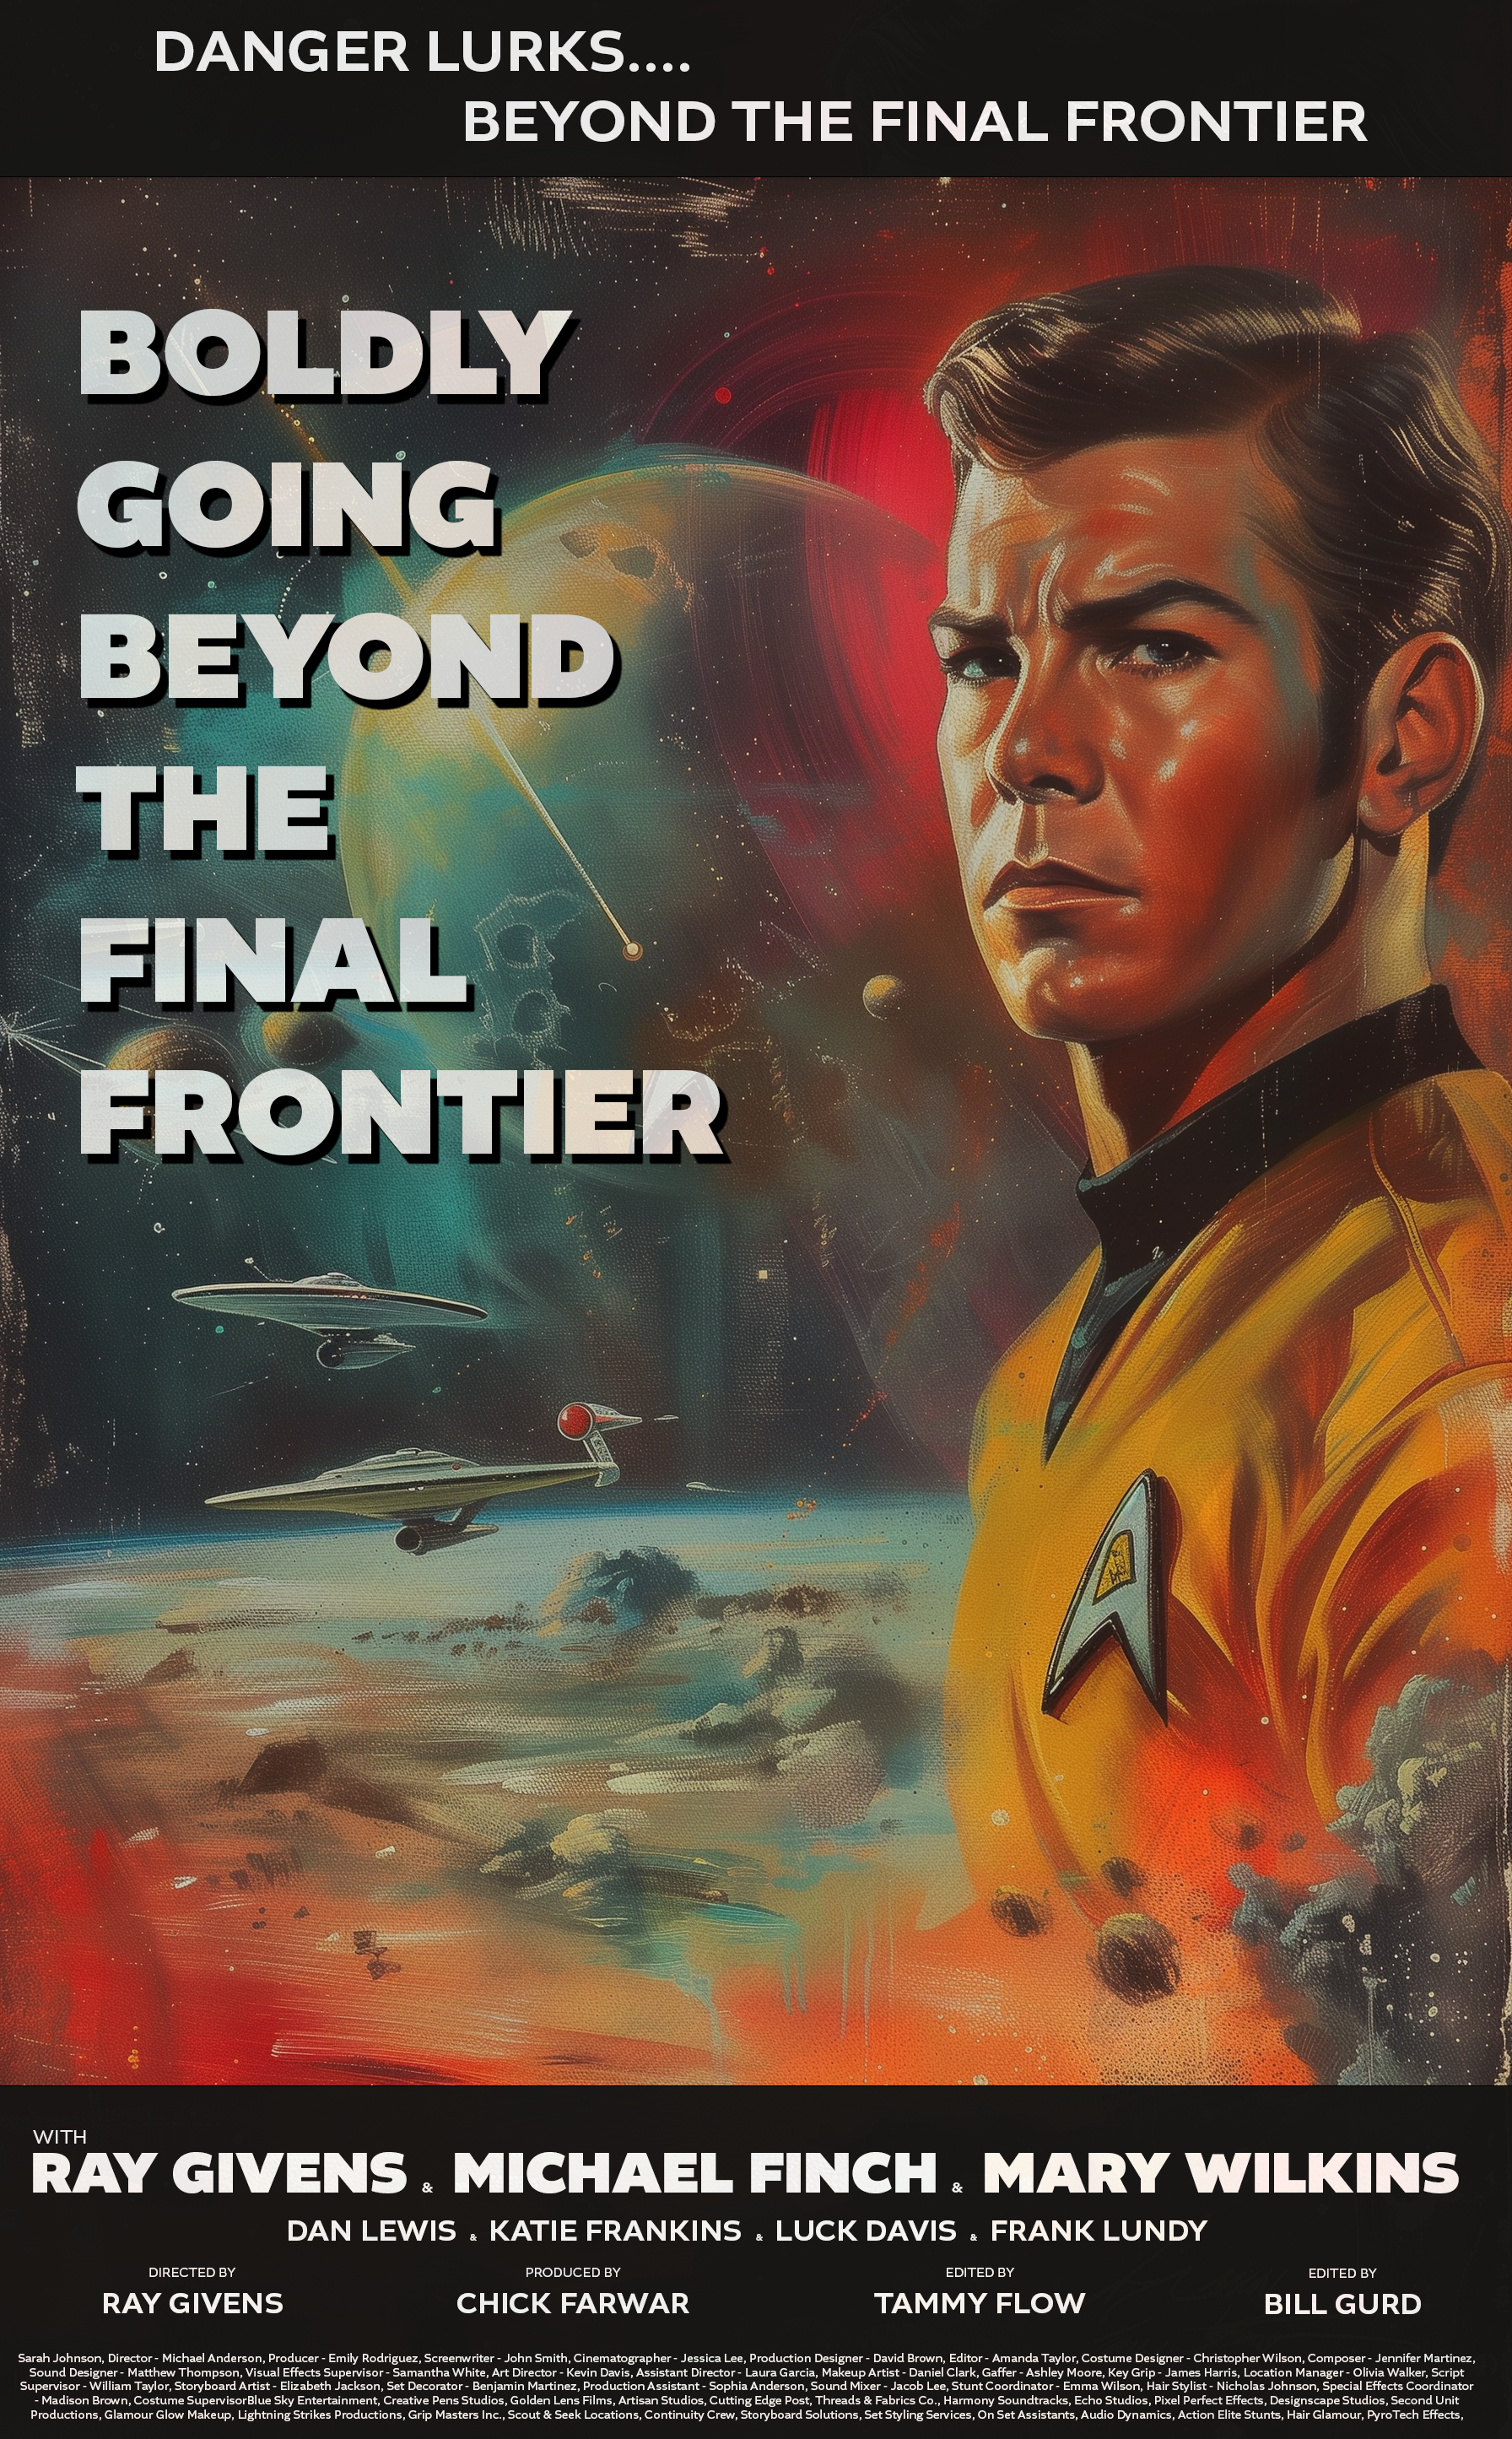 Name:  Beyond the Final Frontier.png
Views: 133
Size:  8.19 MB